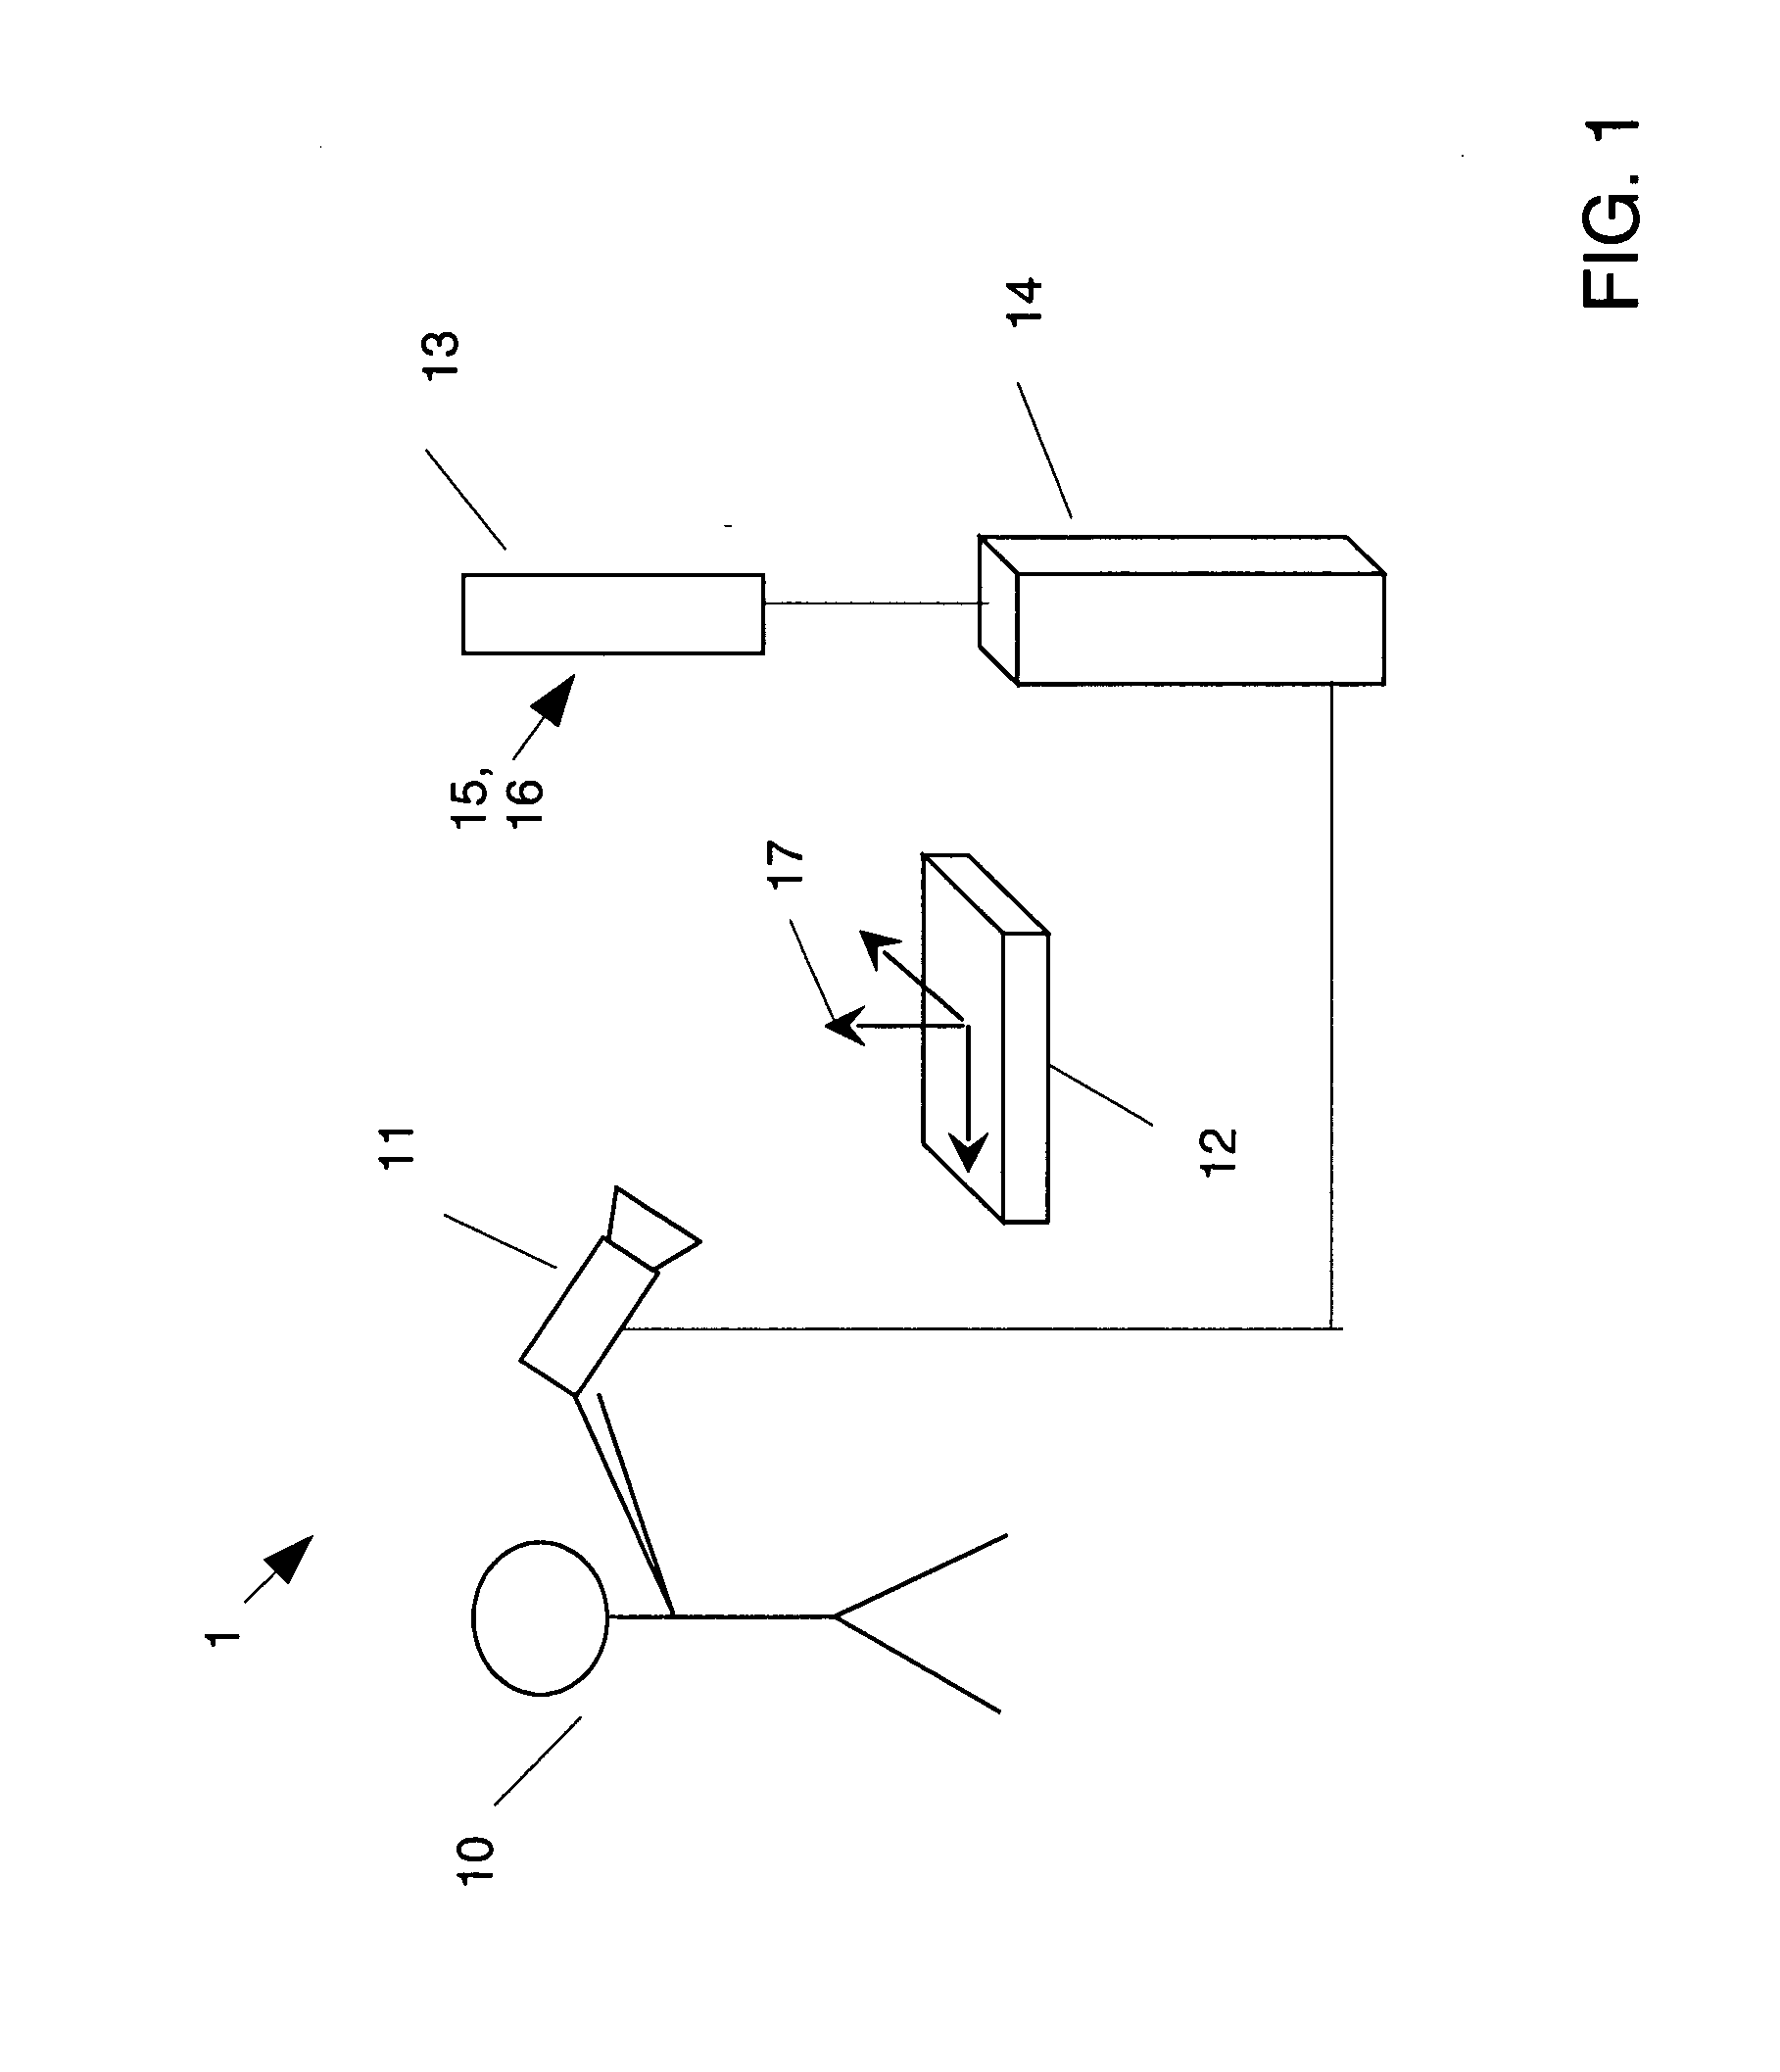 Method and system for analyzing an image generated by at least one camera